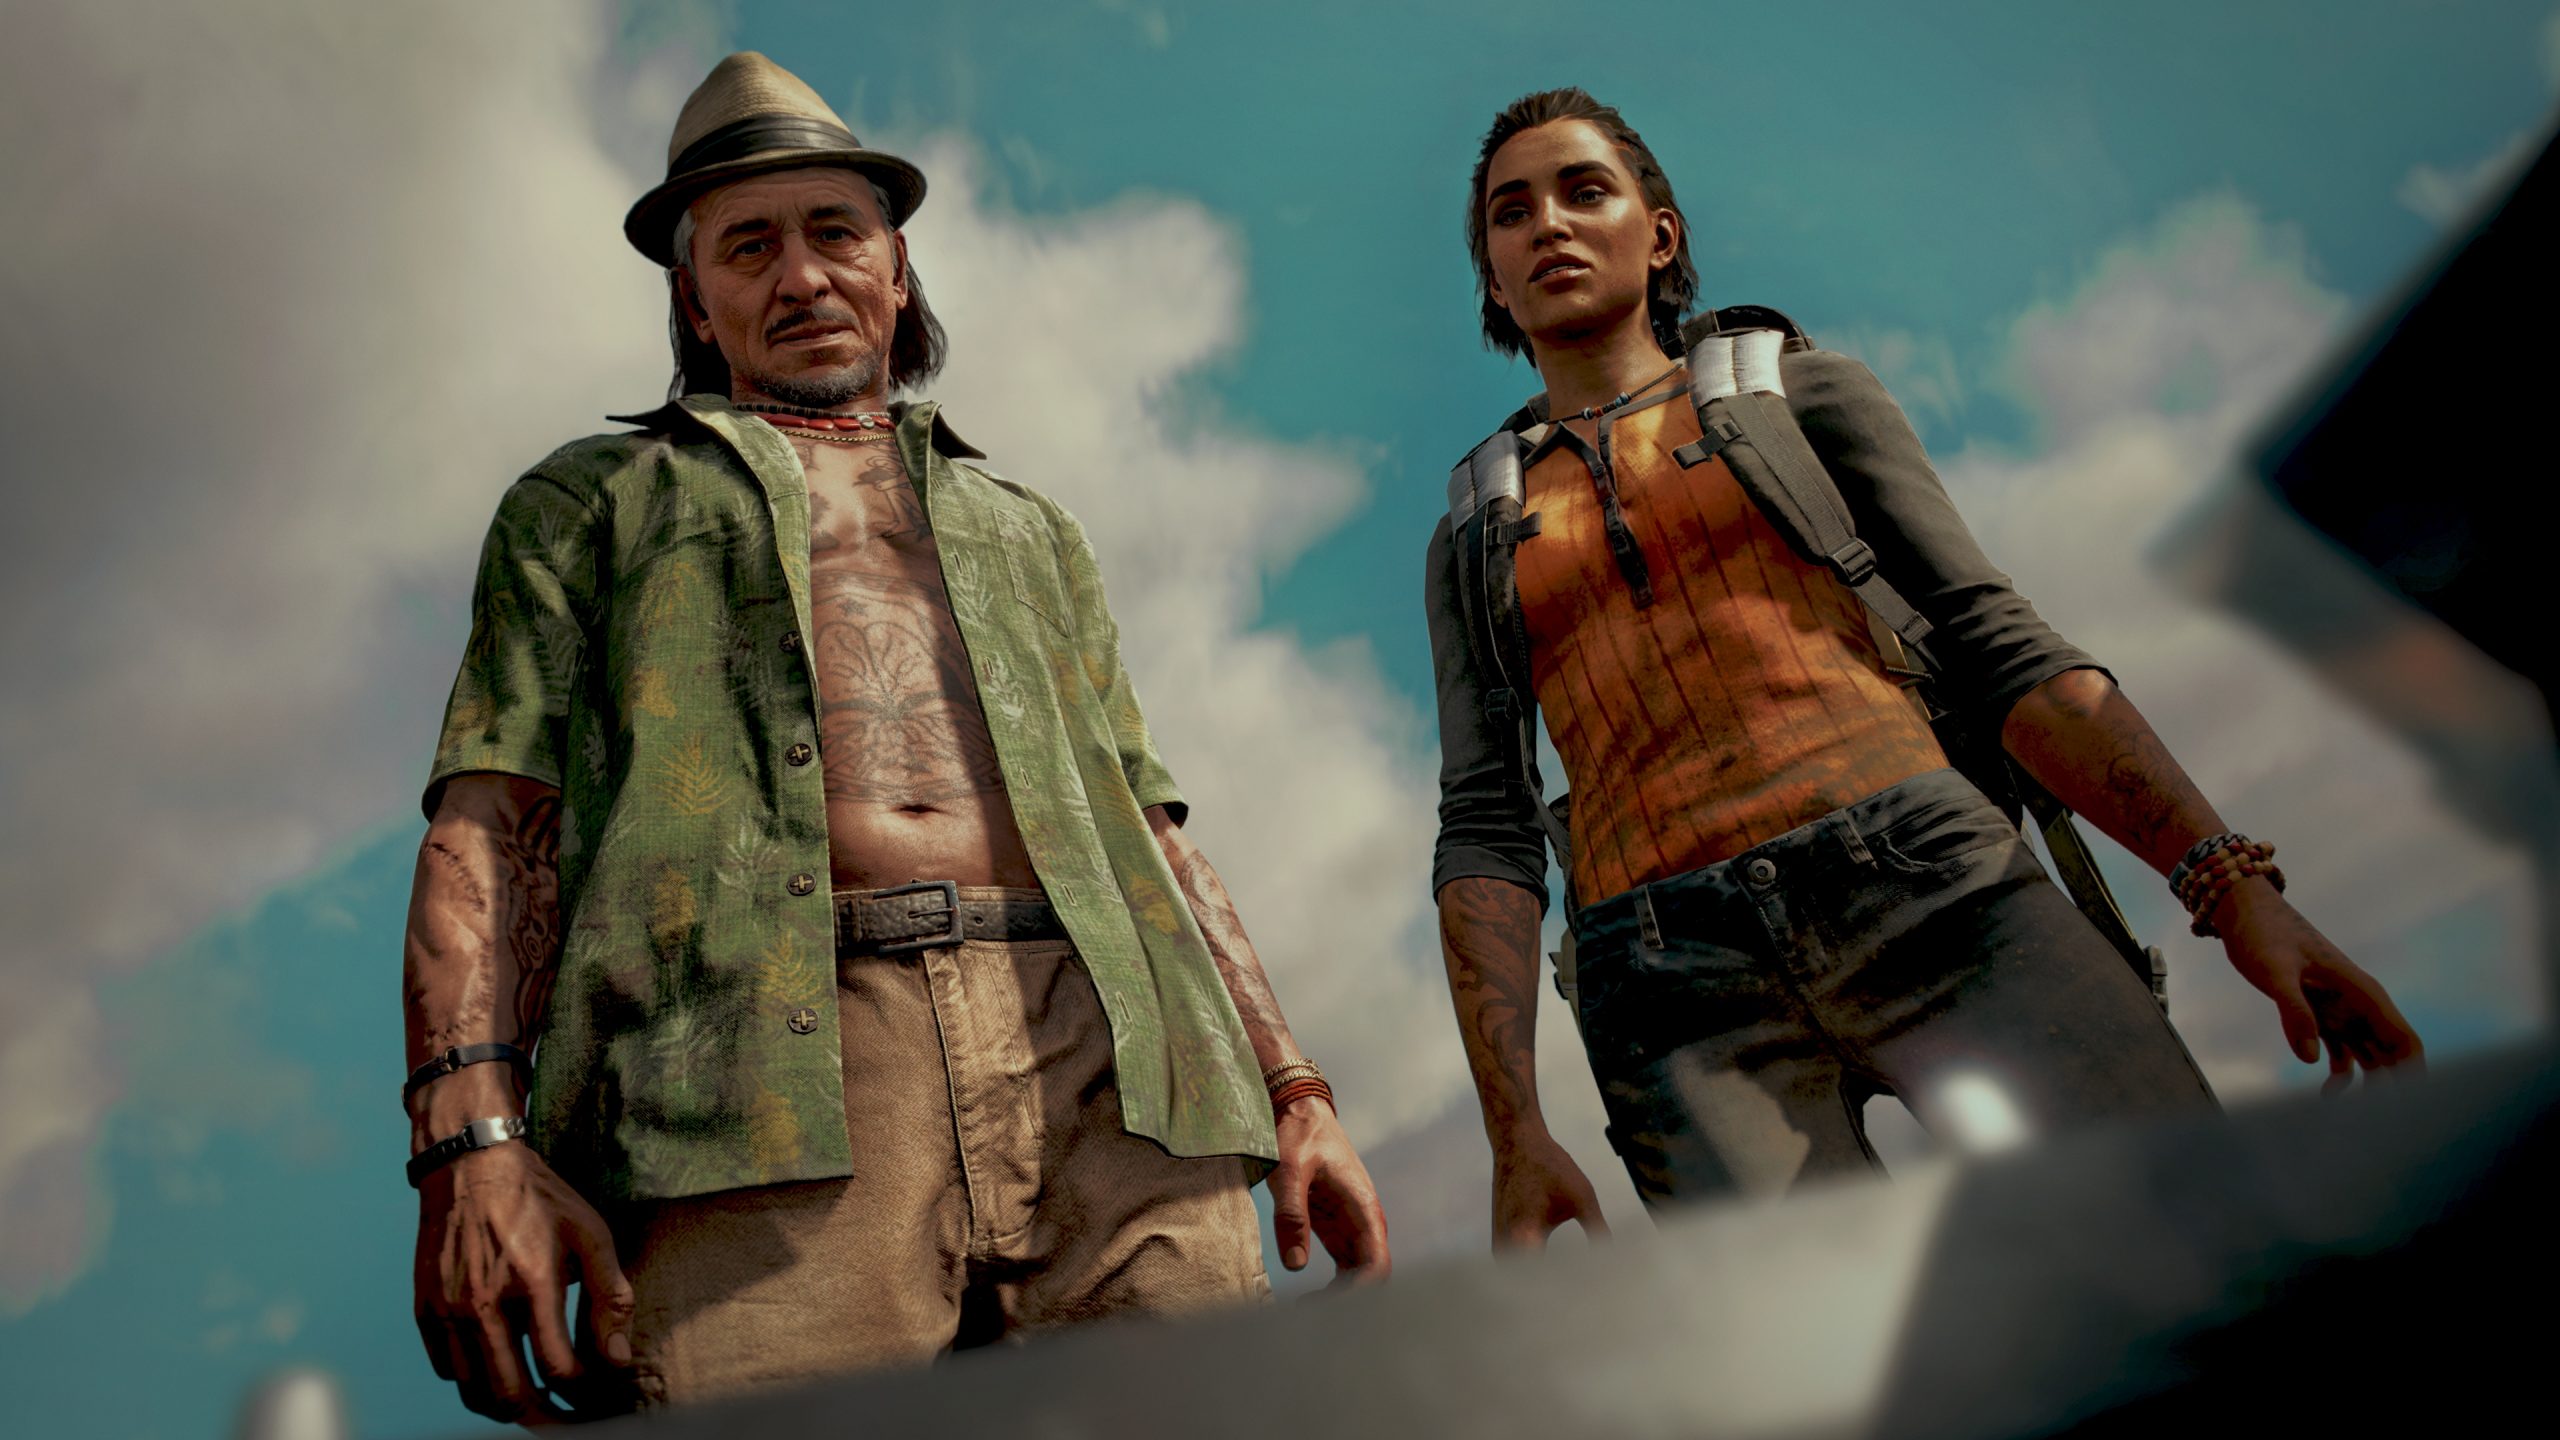 Far Cry 6 Players Are Finding A Quick Death Thanks To An Easter Egg – Gameranx